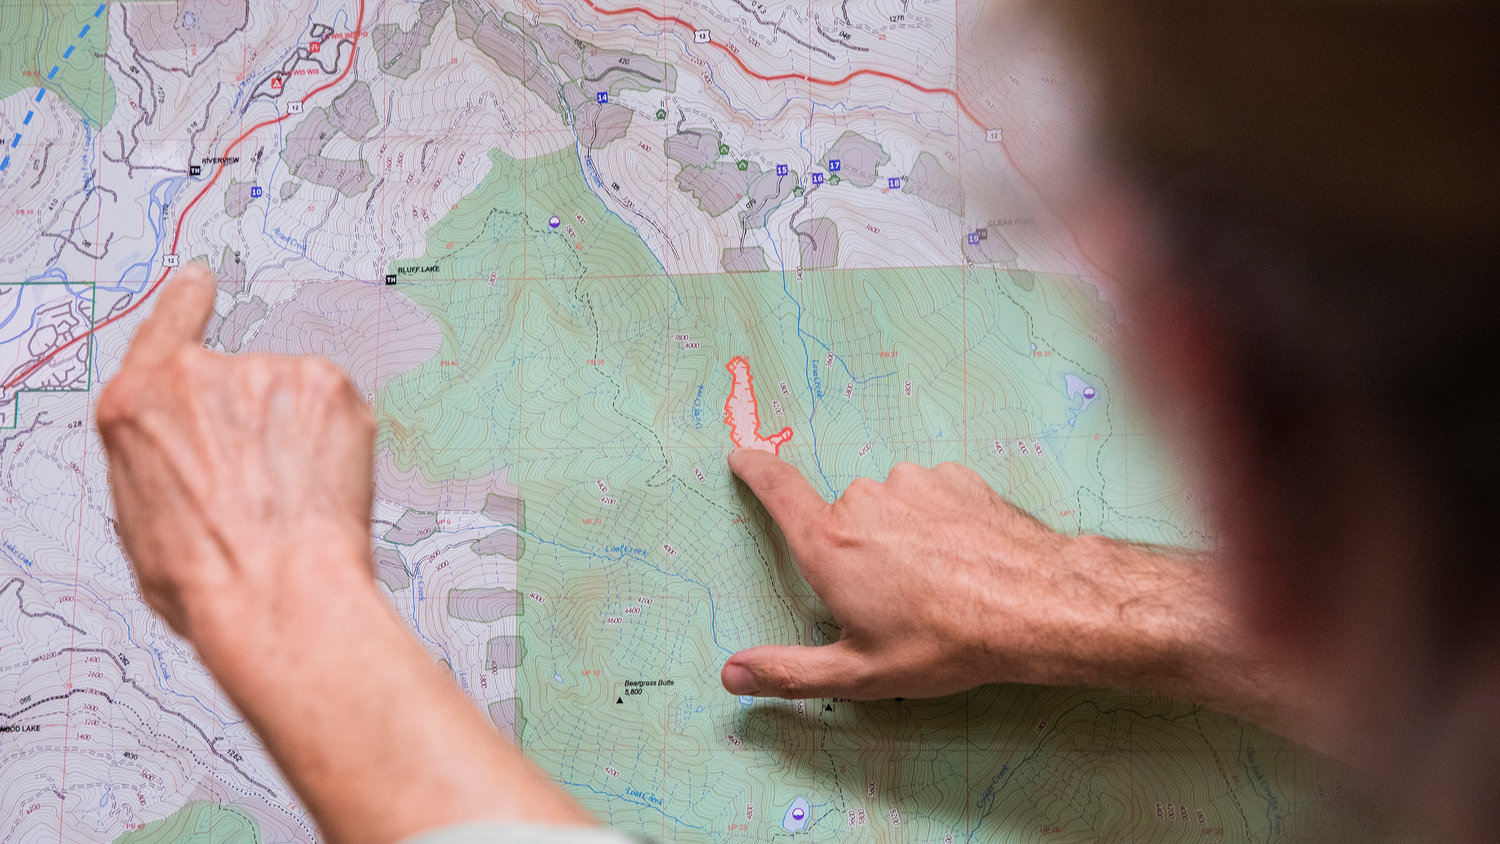 Incident Commander Dan Cottrell points out the Goat Rocks Fire on a map alongside community members Tuesday at the Packwood Community Hall.